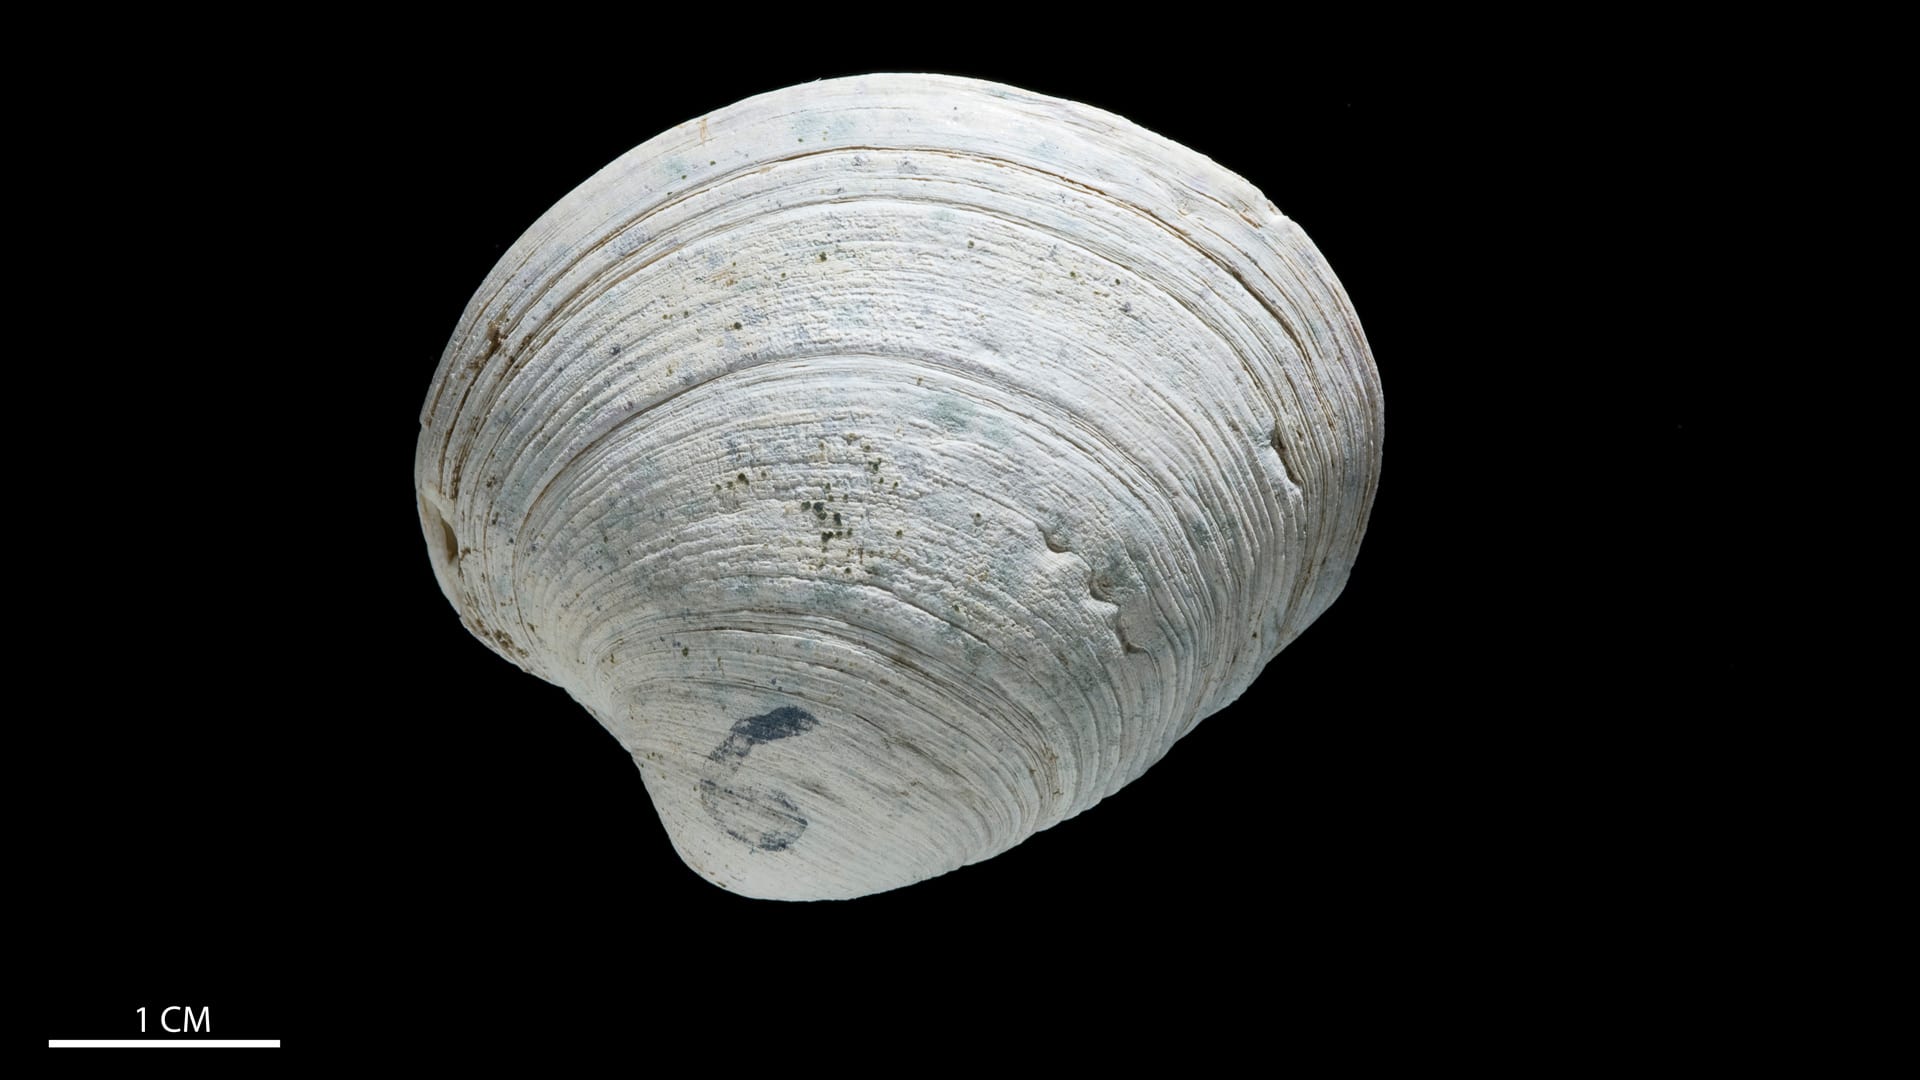 A bivalve clam grown in the lab. Photo by Tom Kleindinst
© Woods Hole Oceanographic Institution